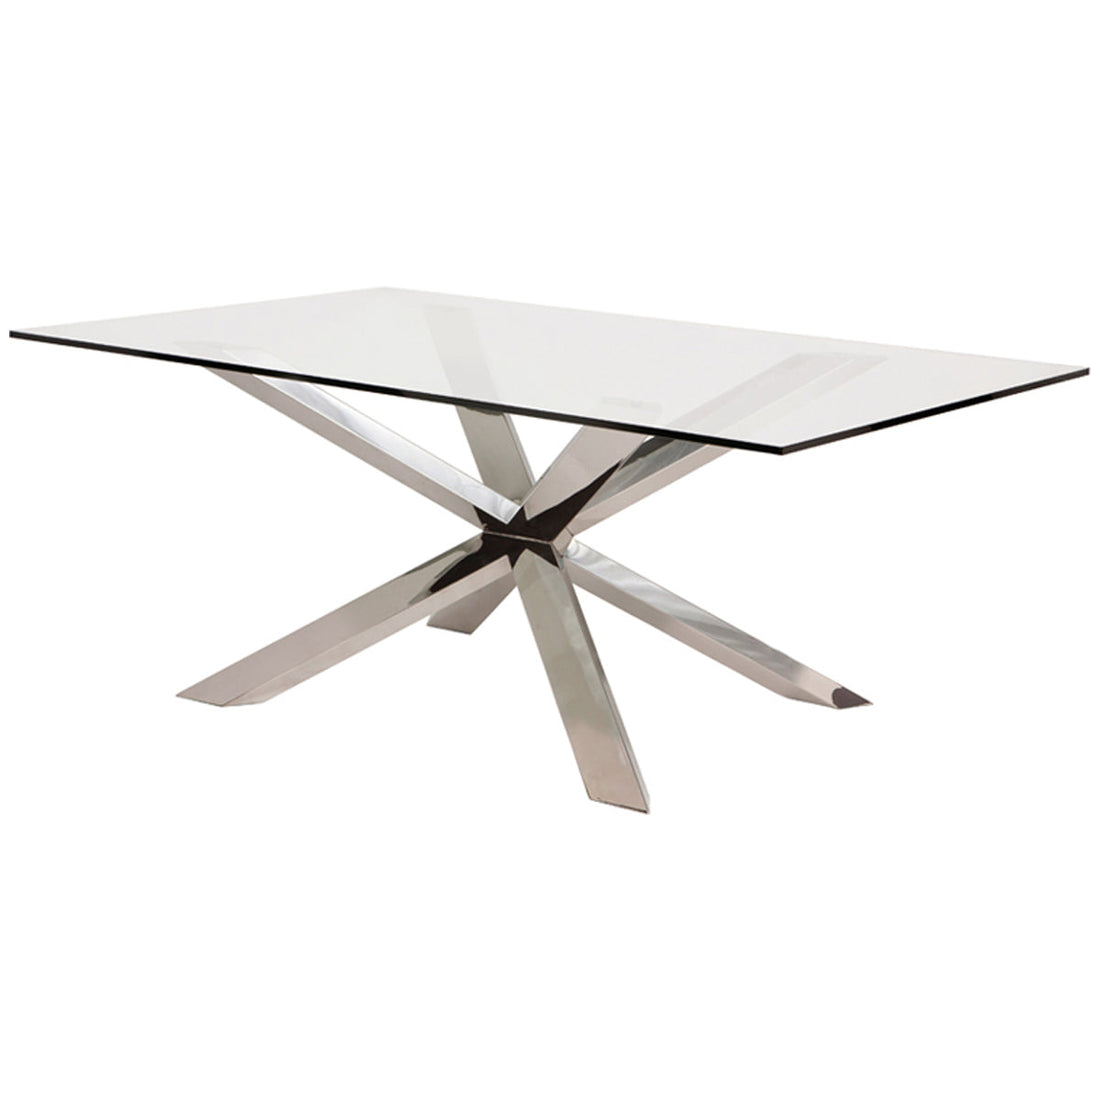 COUTURE - DINING - TABLES - PRODUCTS - NUEVO